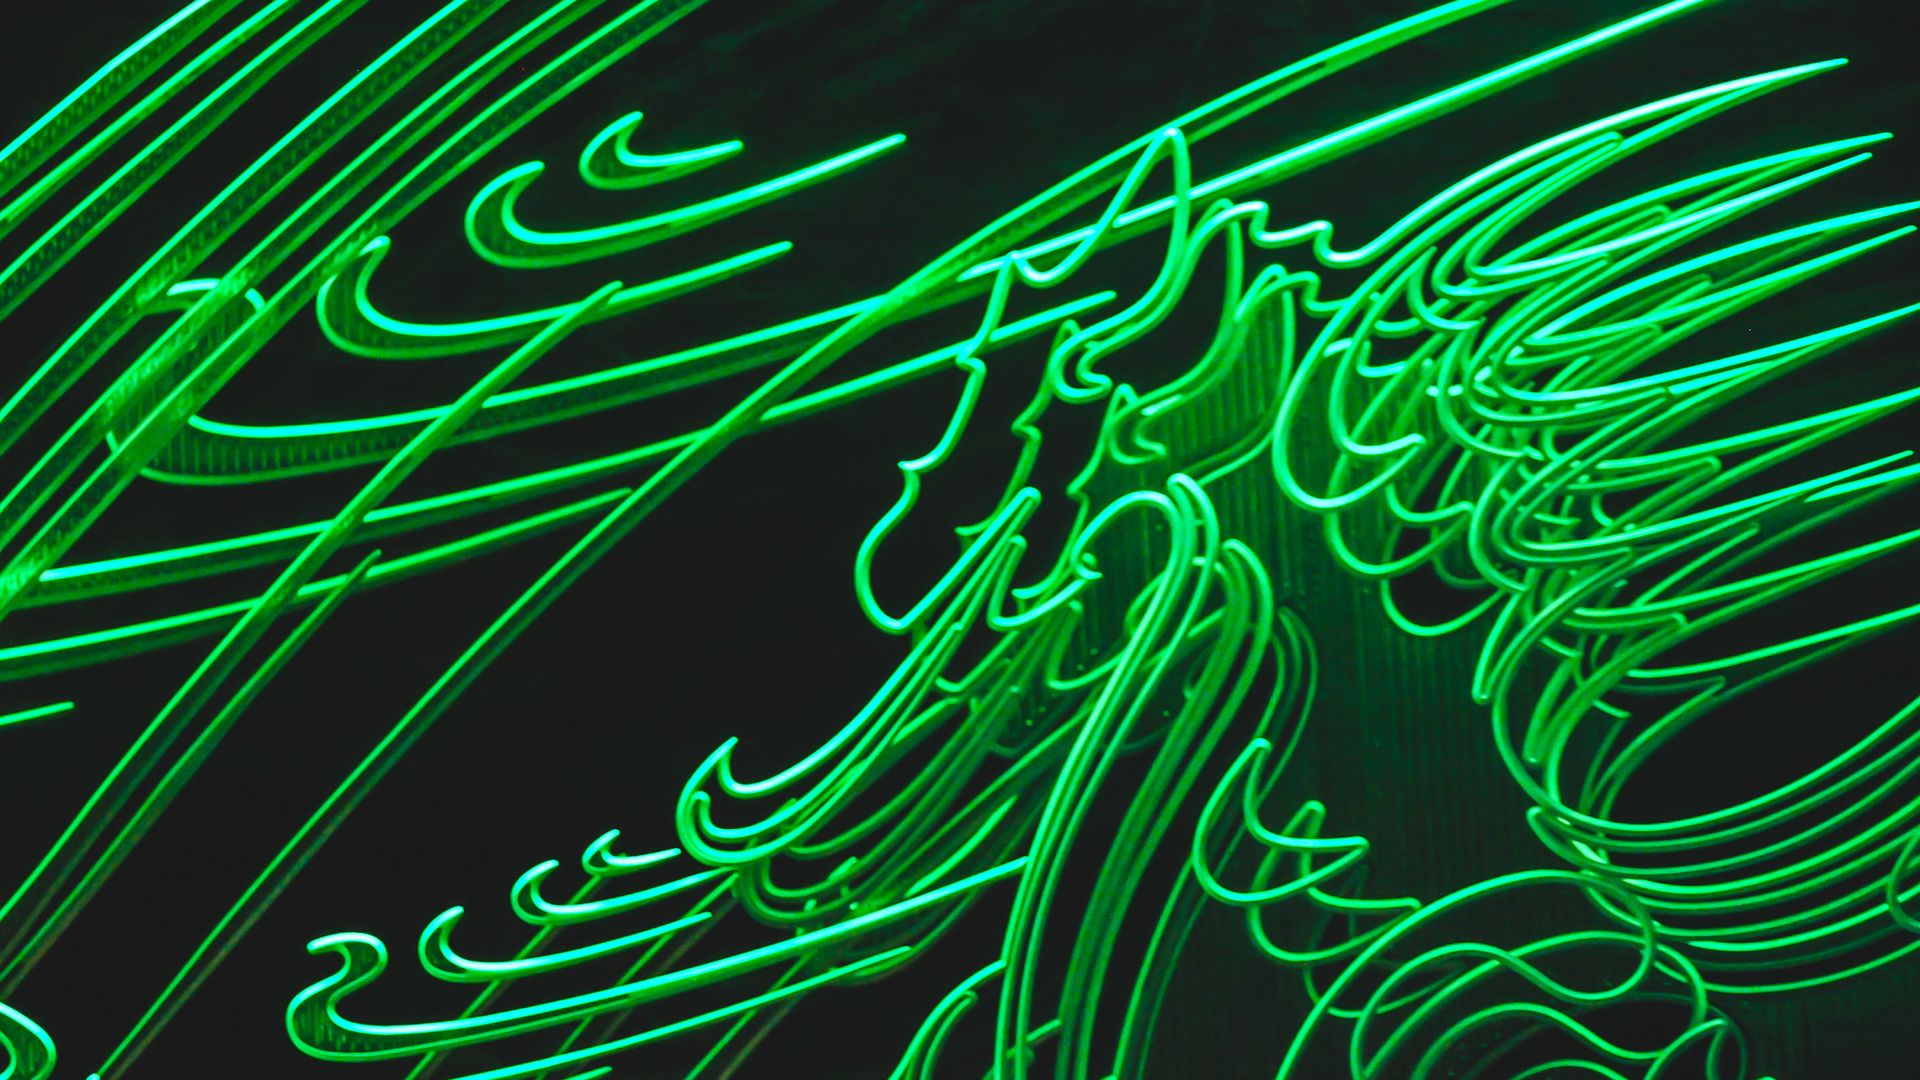 Download wallpaper 1920x1080 neon, green, glow, light, abstraction full hd, hdtv, fhd, 1080p HD background